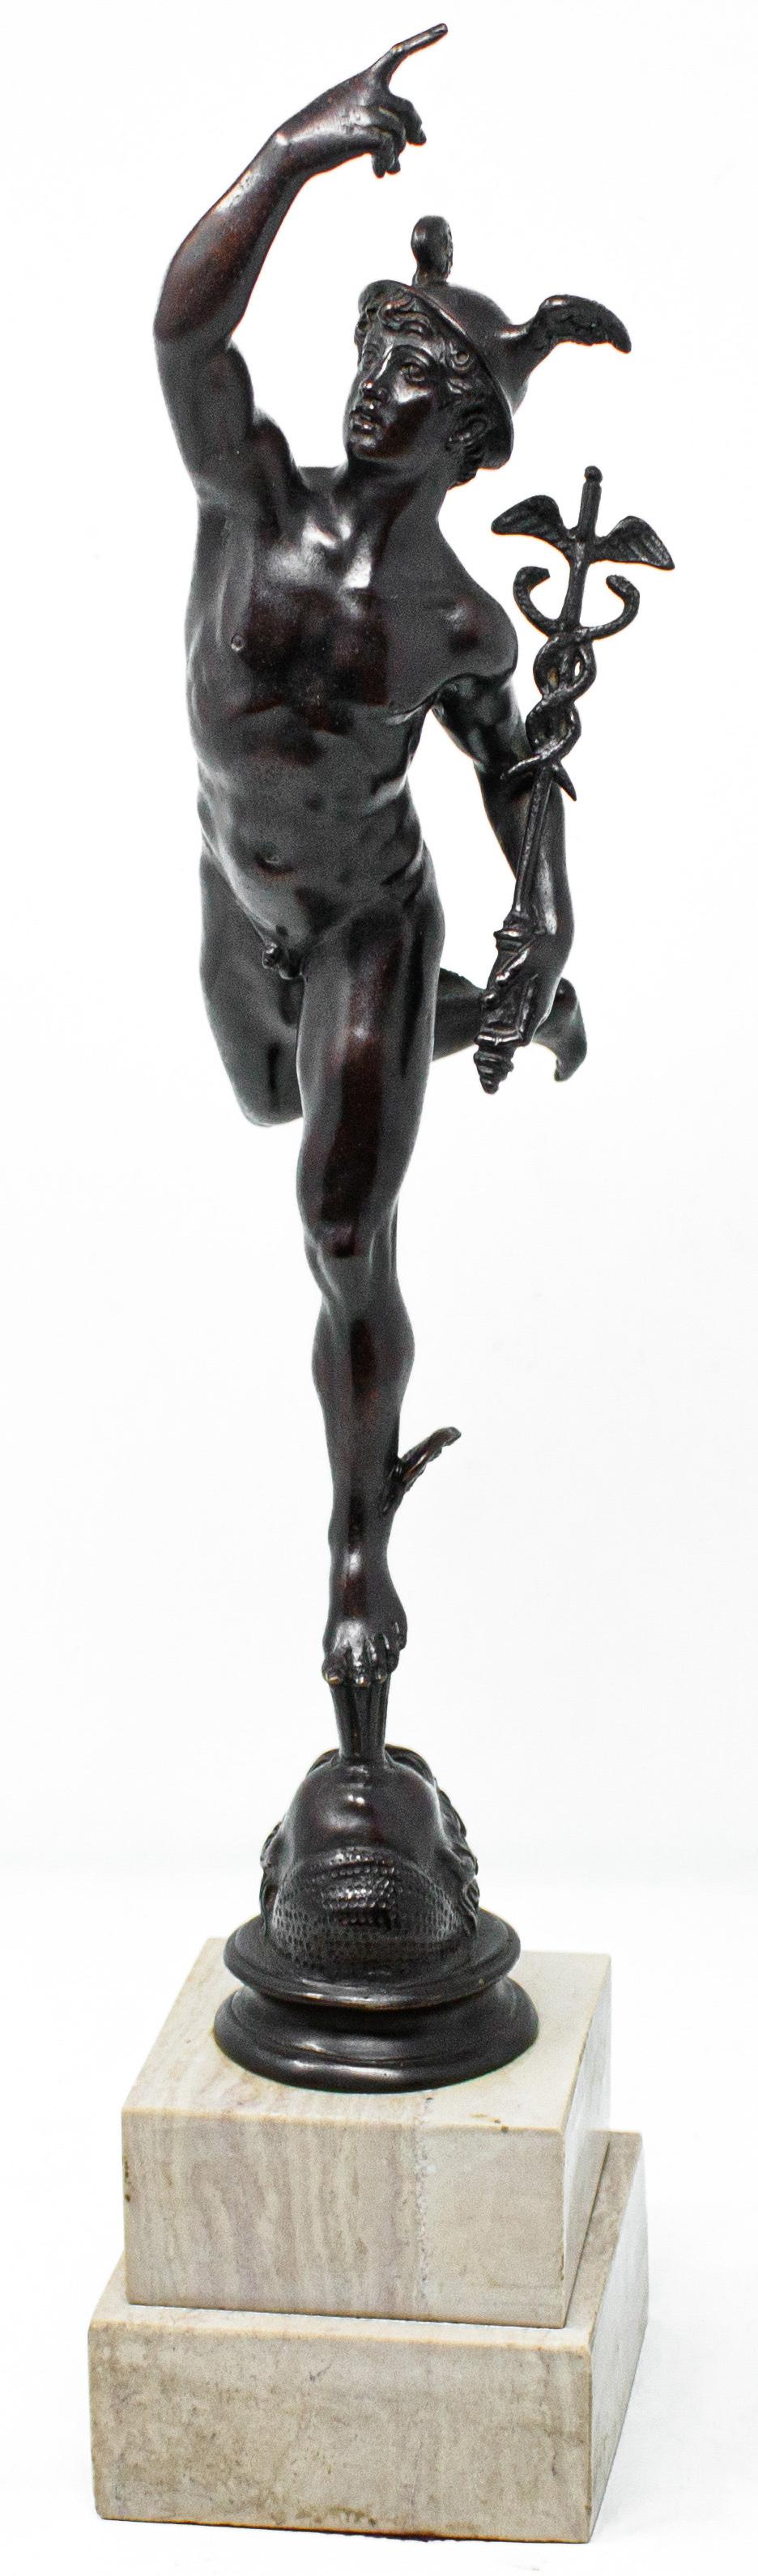 19th century, by Giambologna (1529-1608)

Flying mercury

Bronze cm alt. 43.5 x 9 x 9

Son of Jupiter and divine messenger, Mercury-Hermes was protector of sailors and travelers, as well as champion in athletic prowess and mediator between men